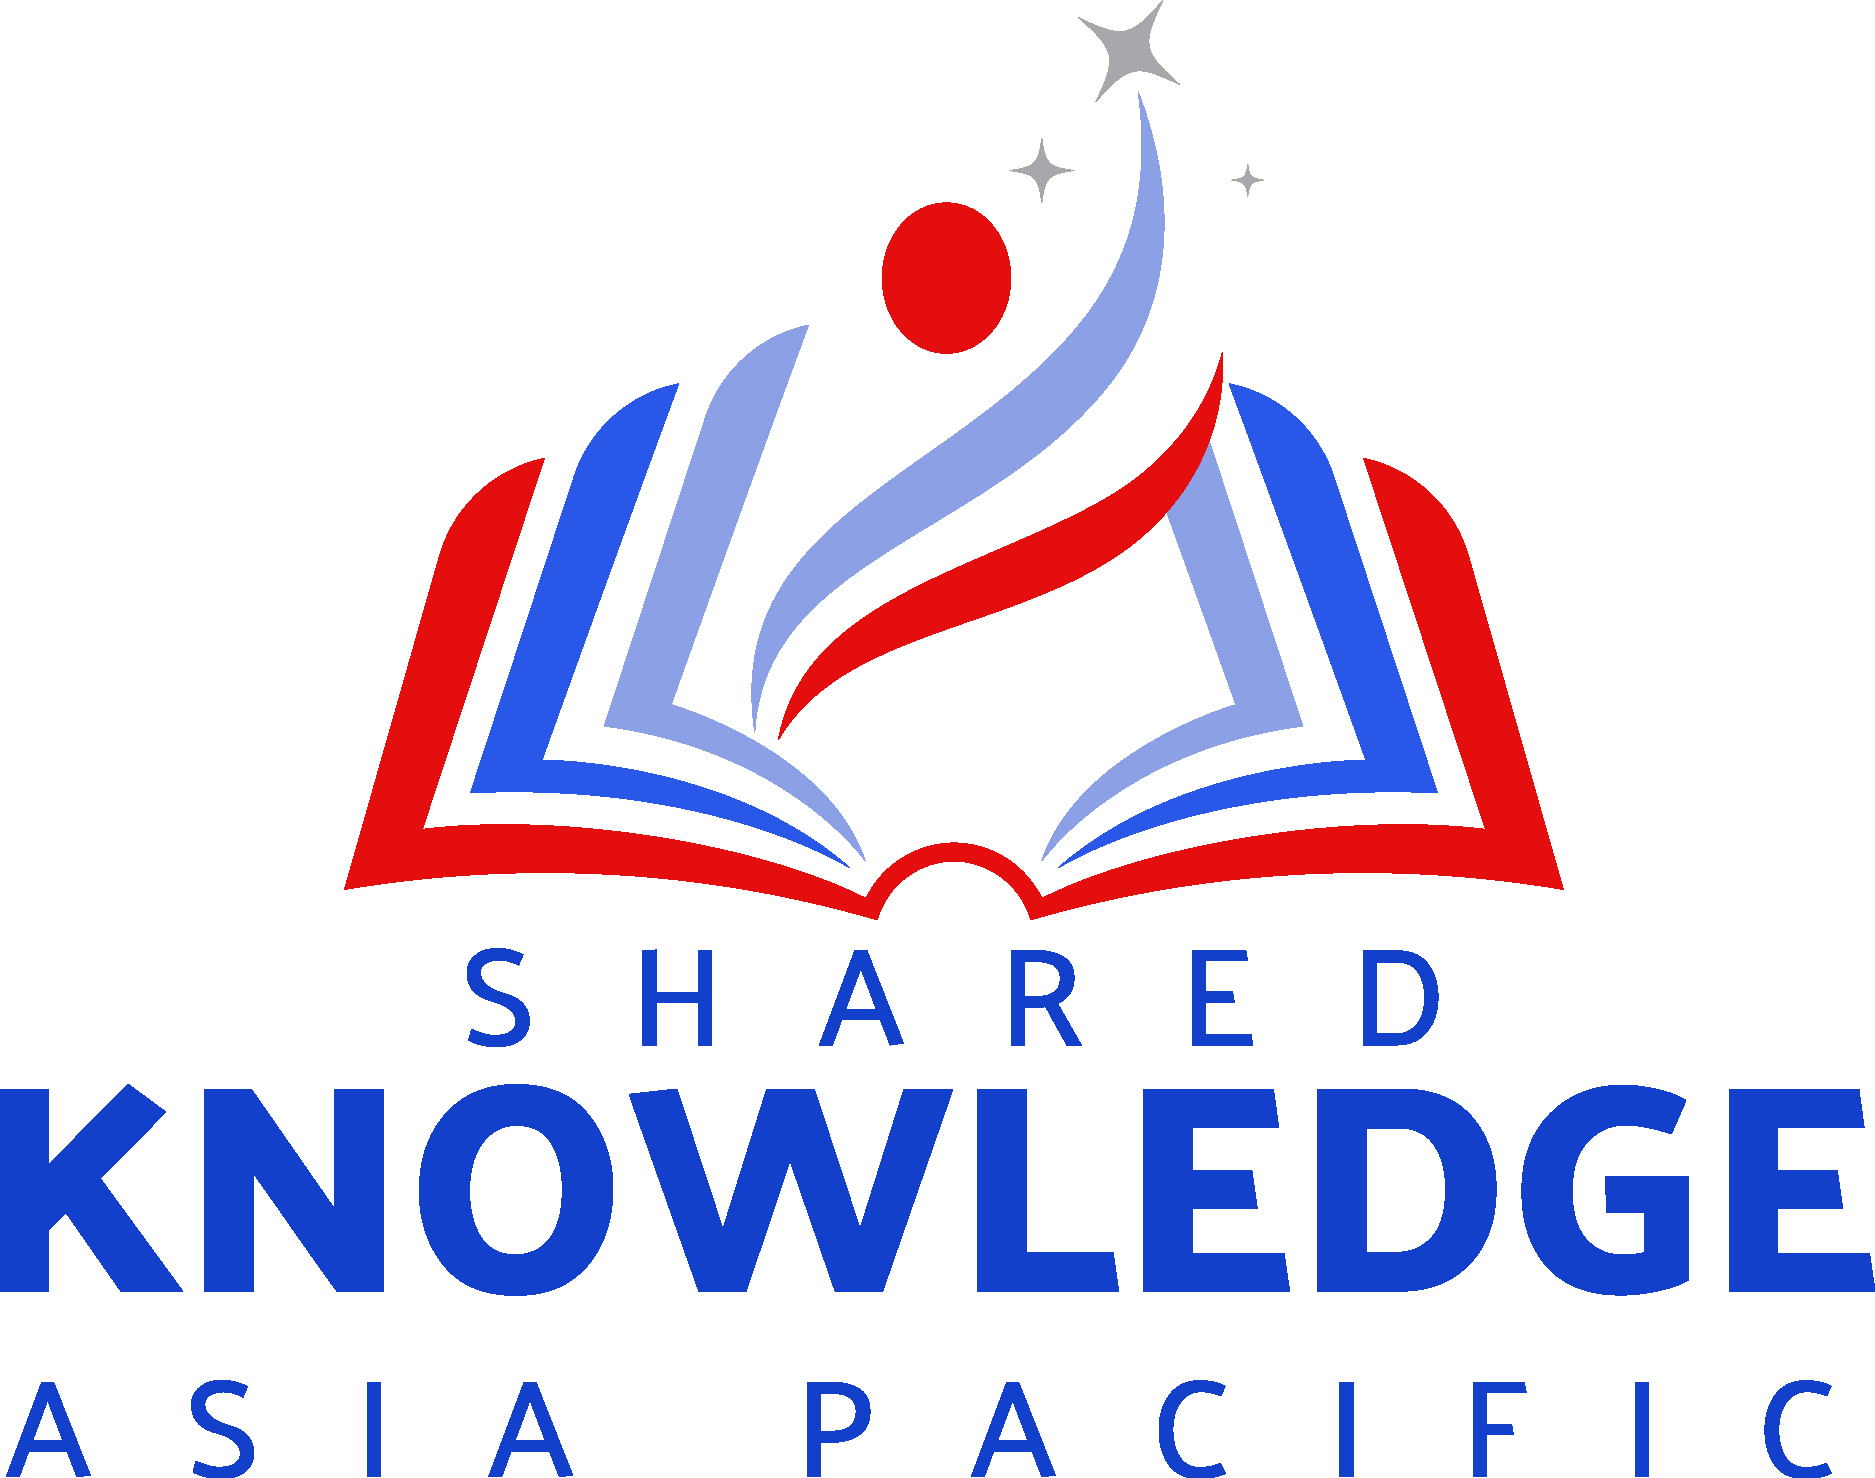 Shared Knowledge Asia Pacific Logo Vector